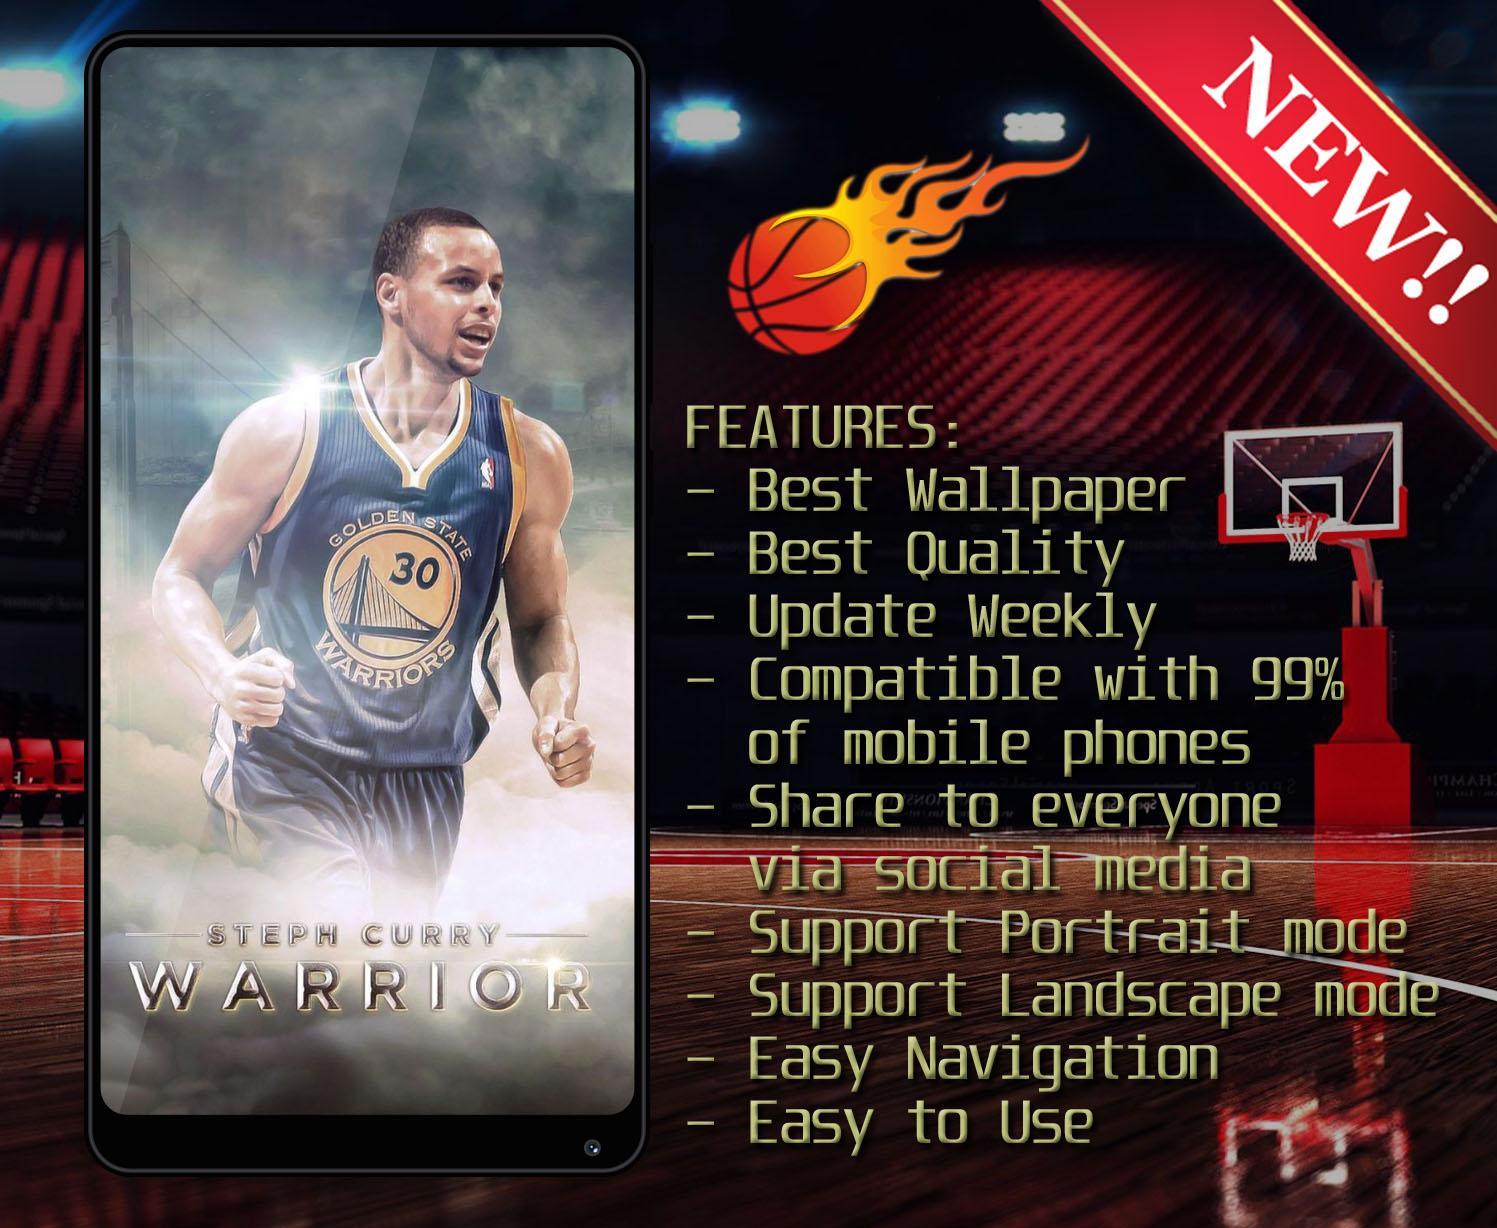 Stephen Curry Wallpaper Hd 4k For Android Apk Download